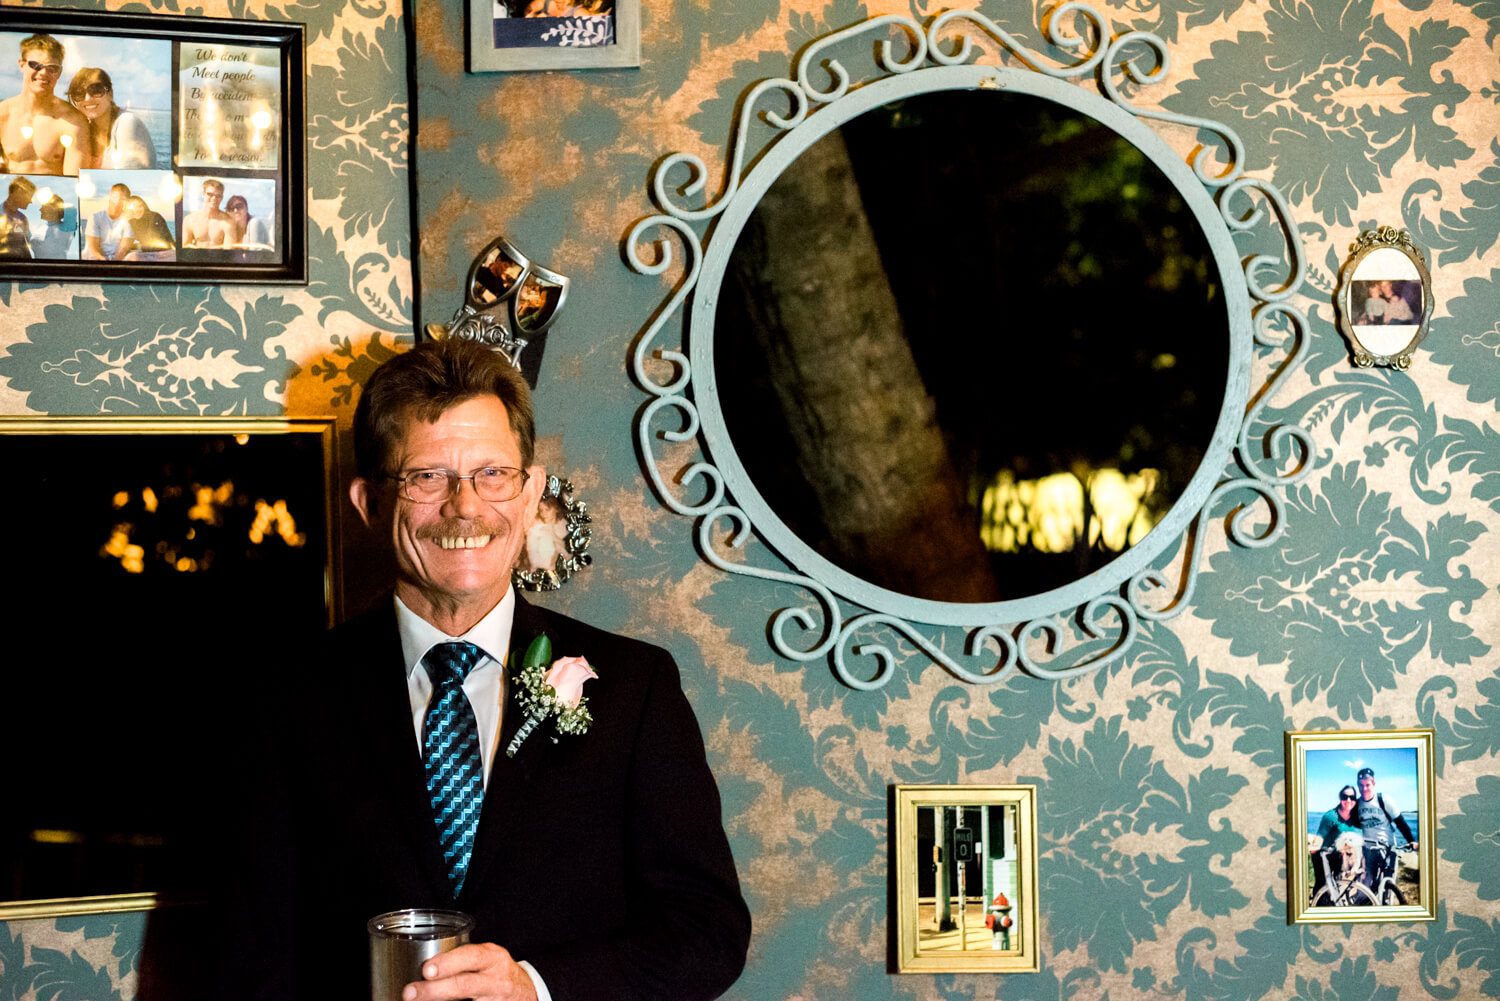 Key West Wedding Photographer captures a man in a suit standing in front of a mirror.